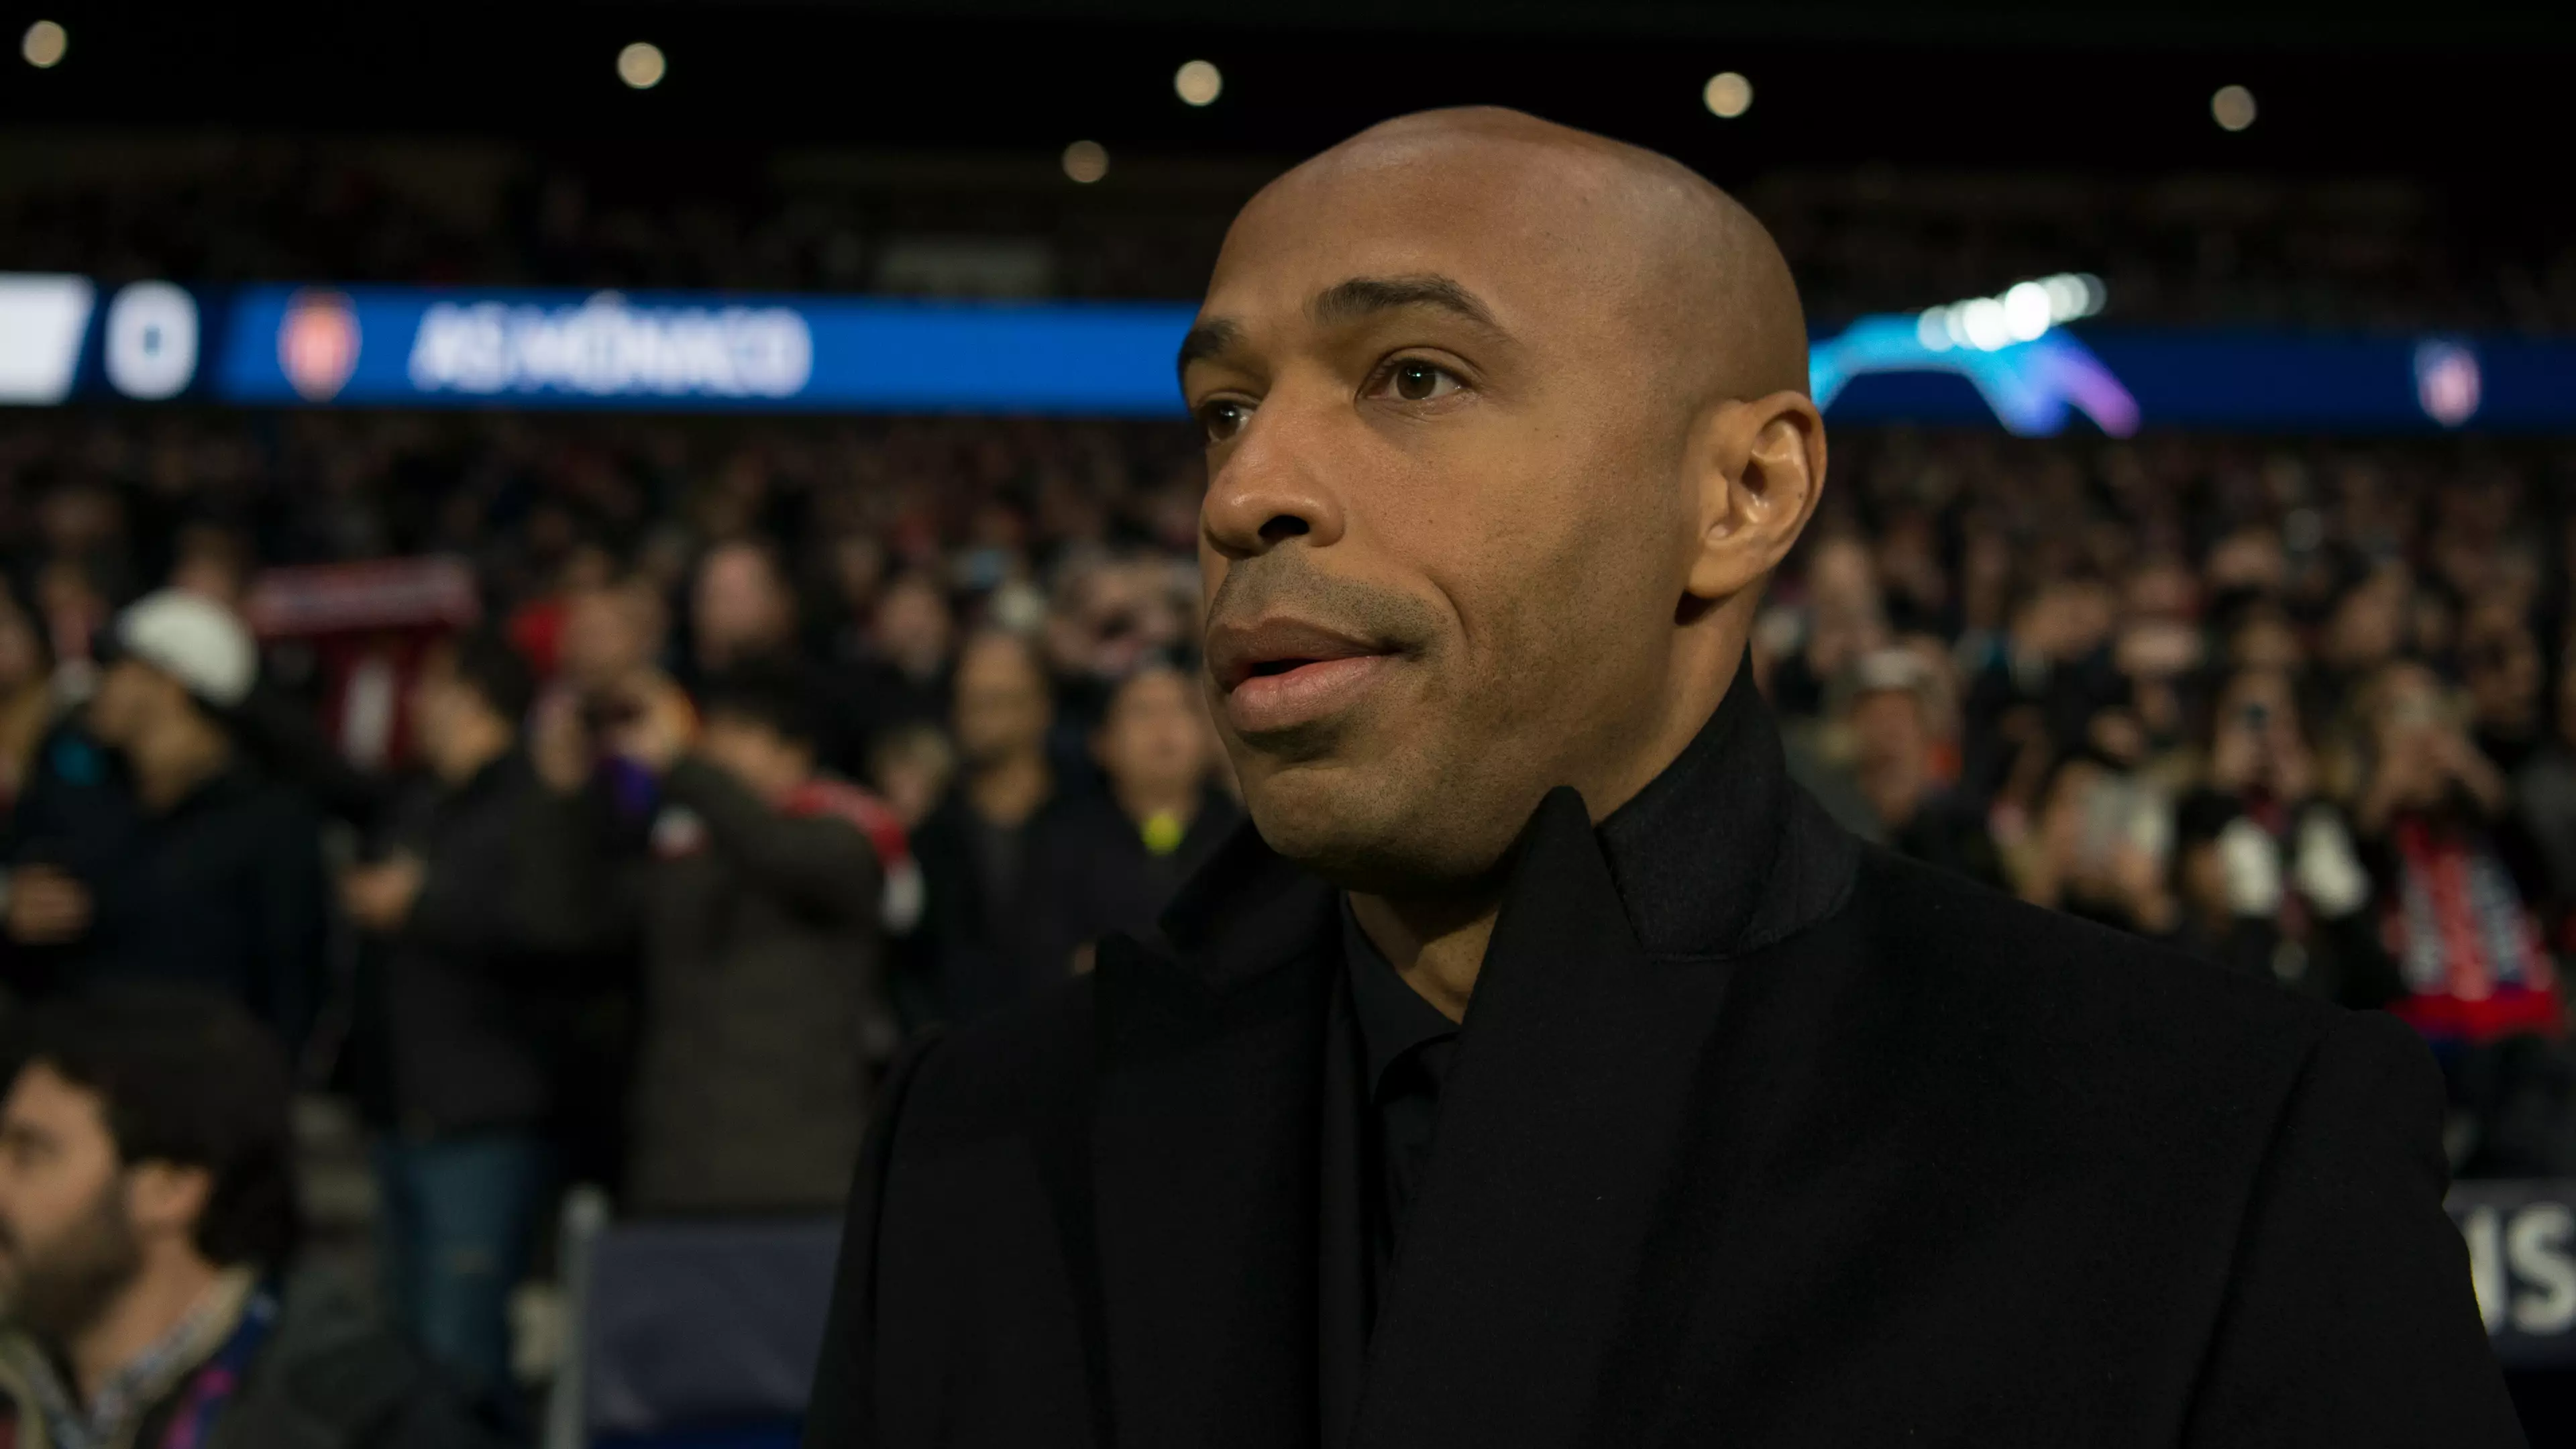 Revealed: How Thierry Henry Humiliated His Players And Lost The Monaco Dressing Room